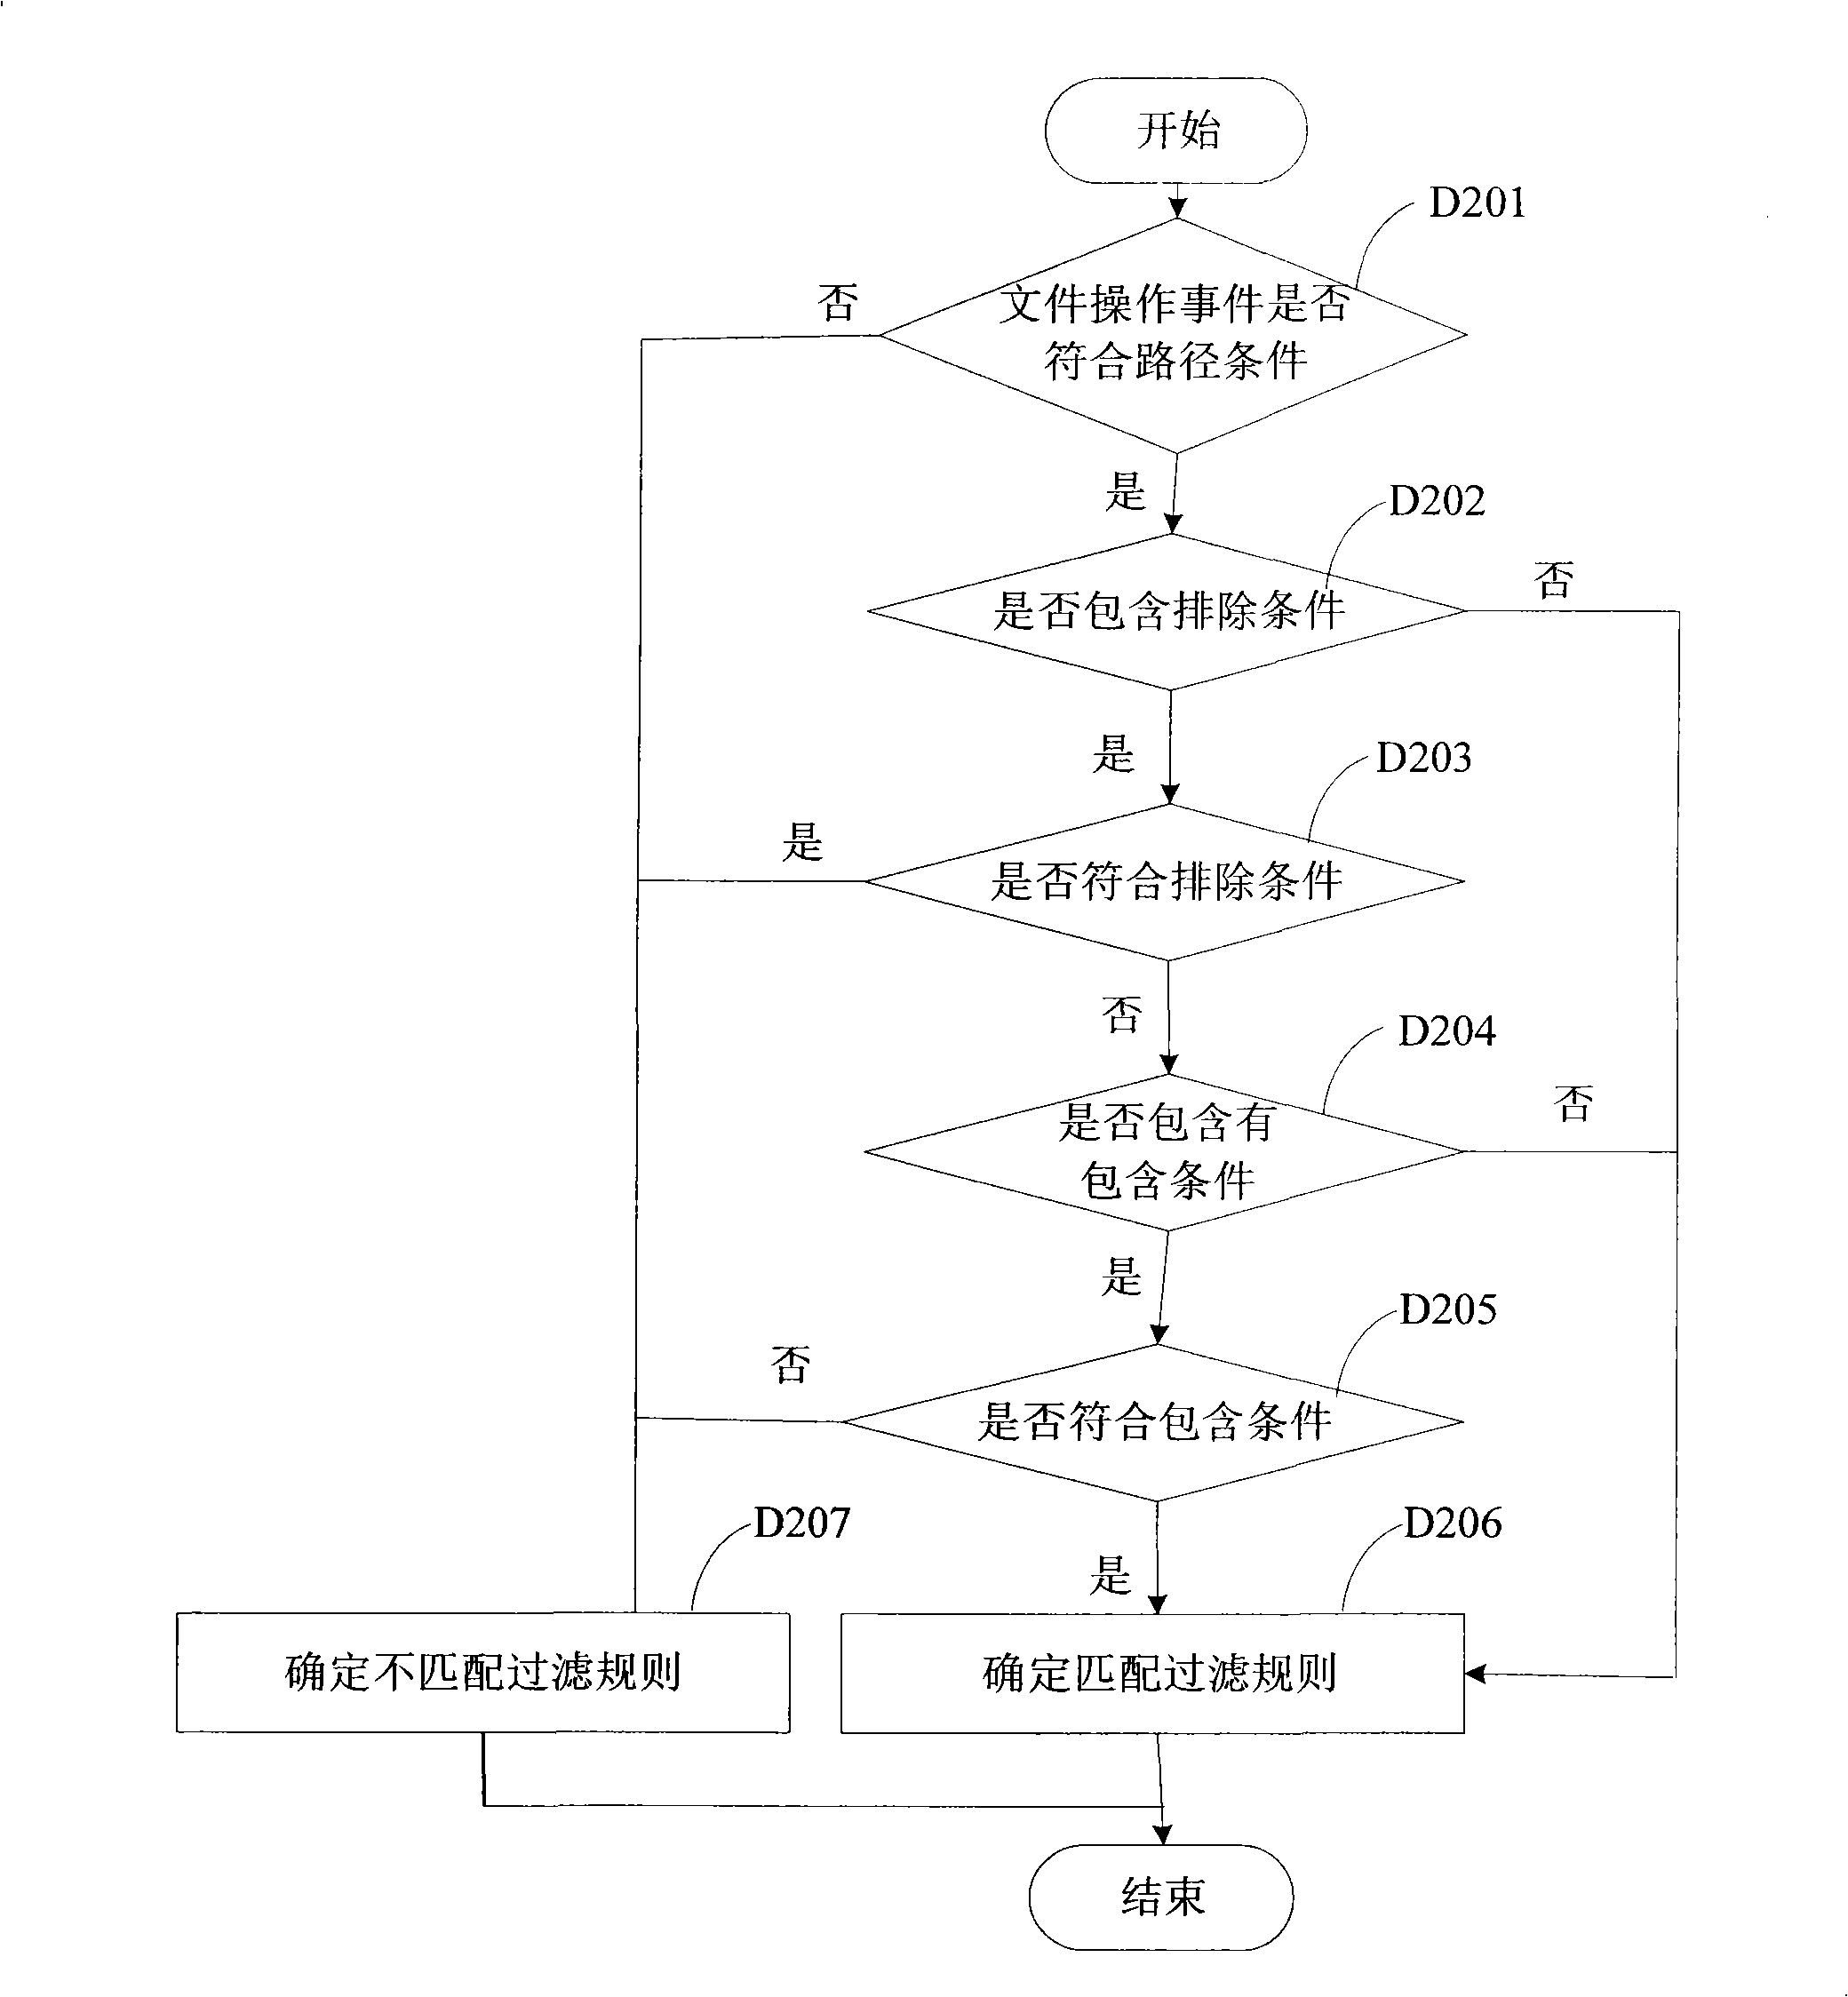 File back-up system and method of computer system